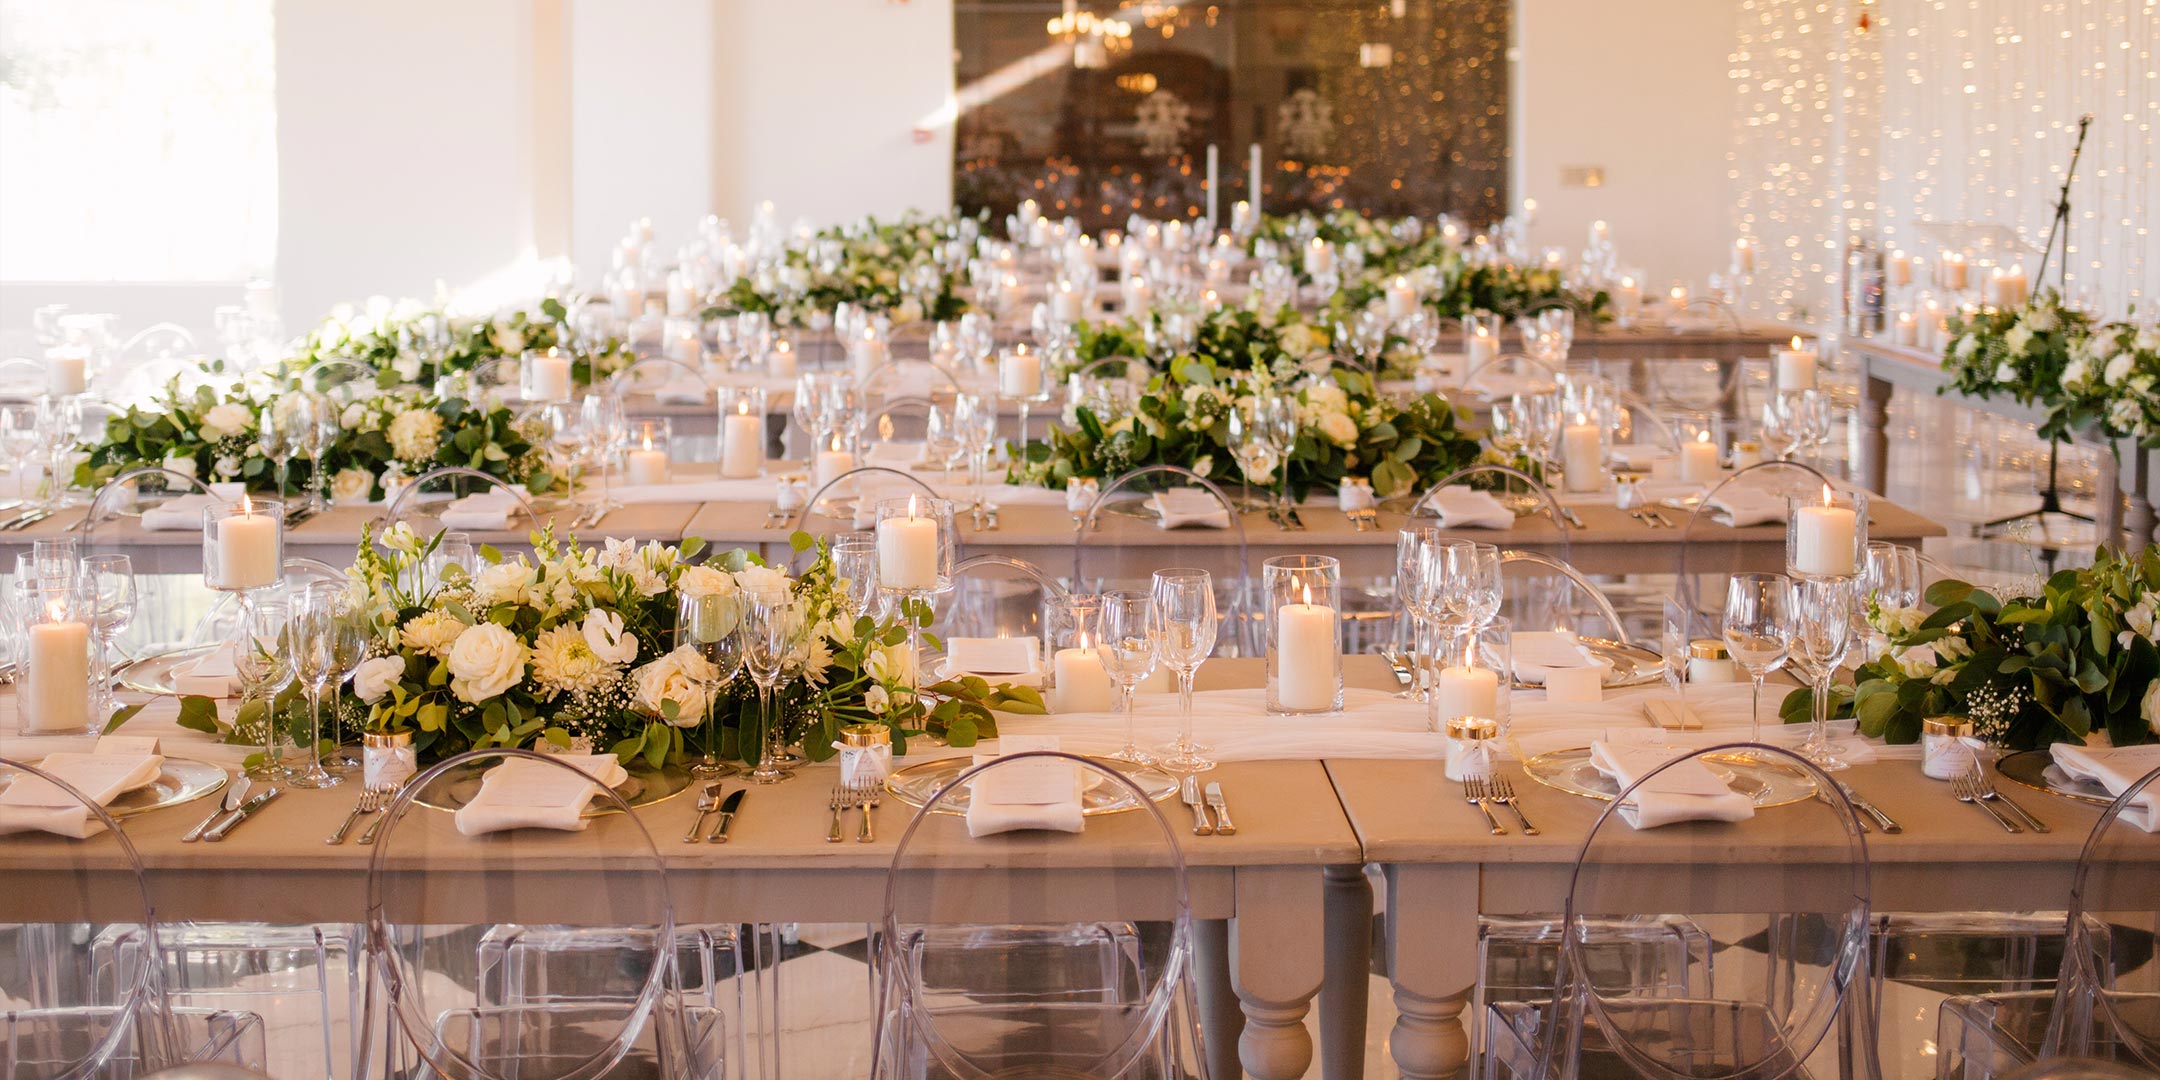 Elegant wedding reception setup with long tables adorned with lush white floral centrepieces, candles, and fine glassware. Fabulous Flowers and Gifts. Weddings.